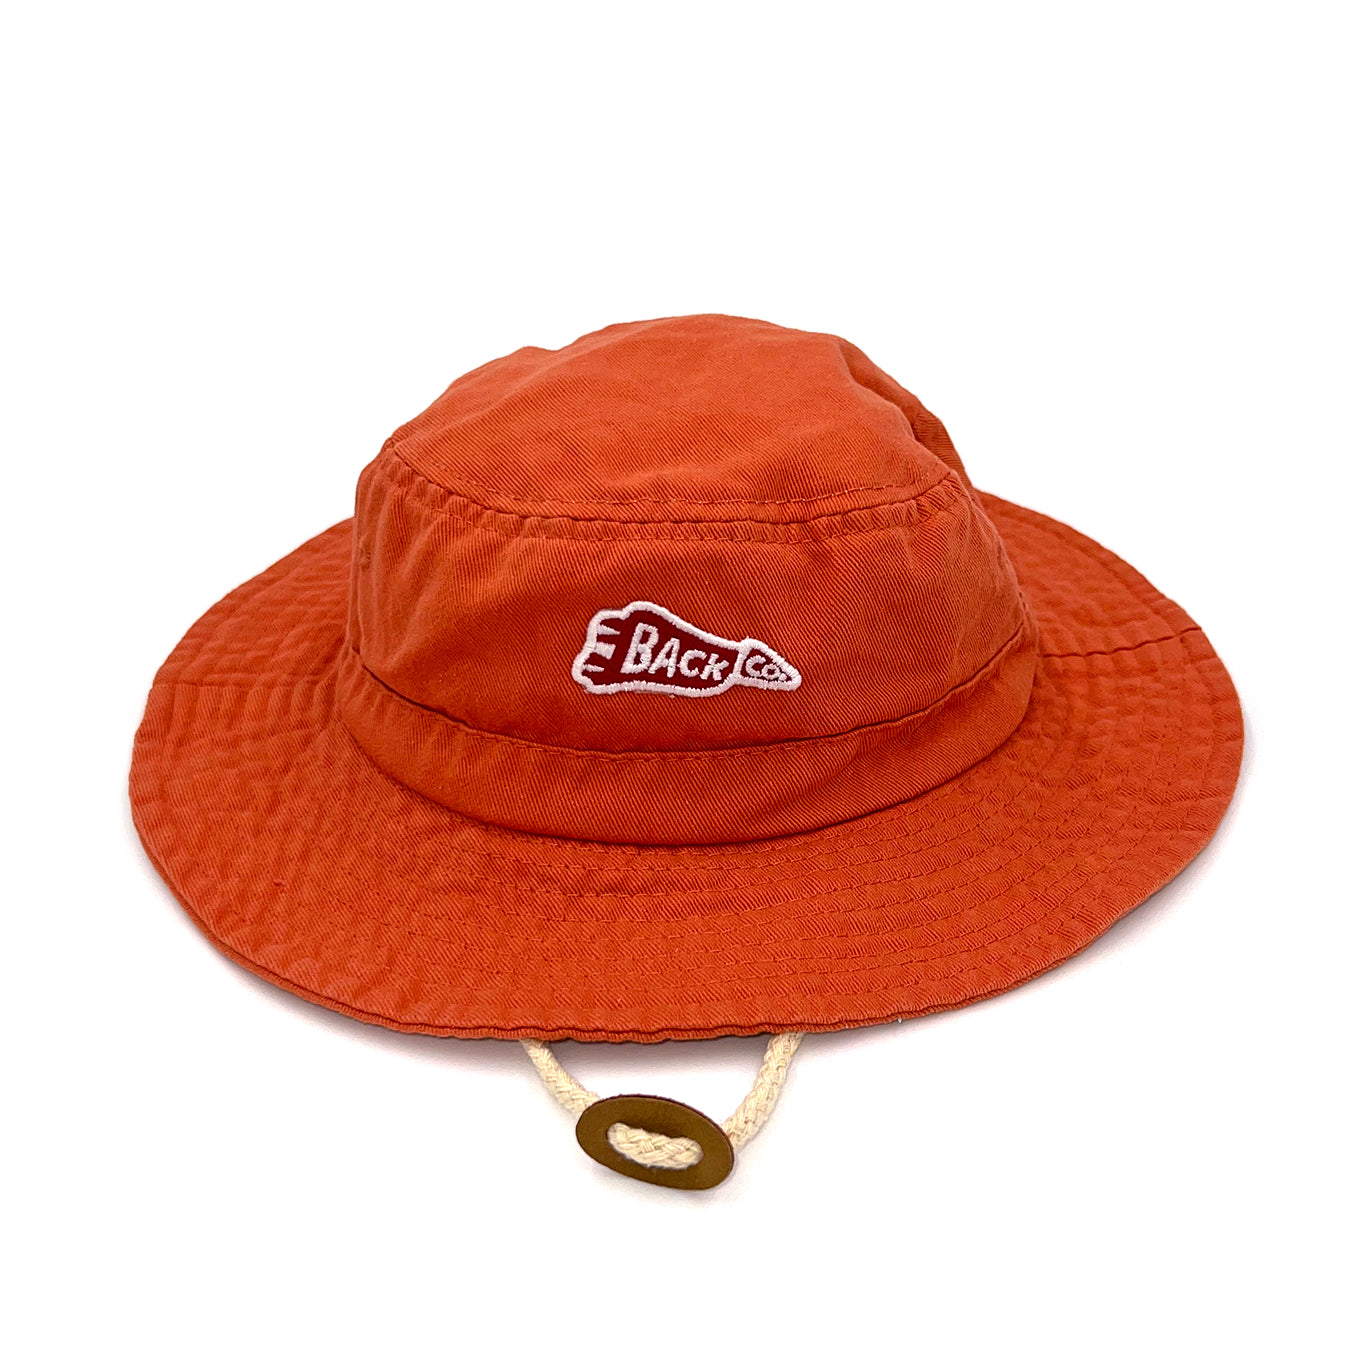 Back Boonie Hat